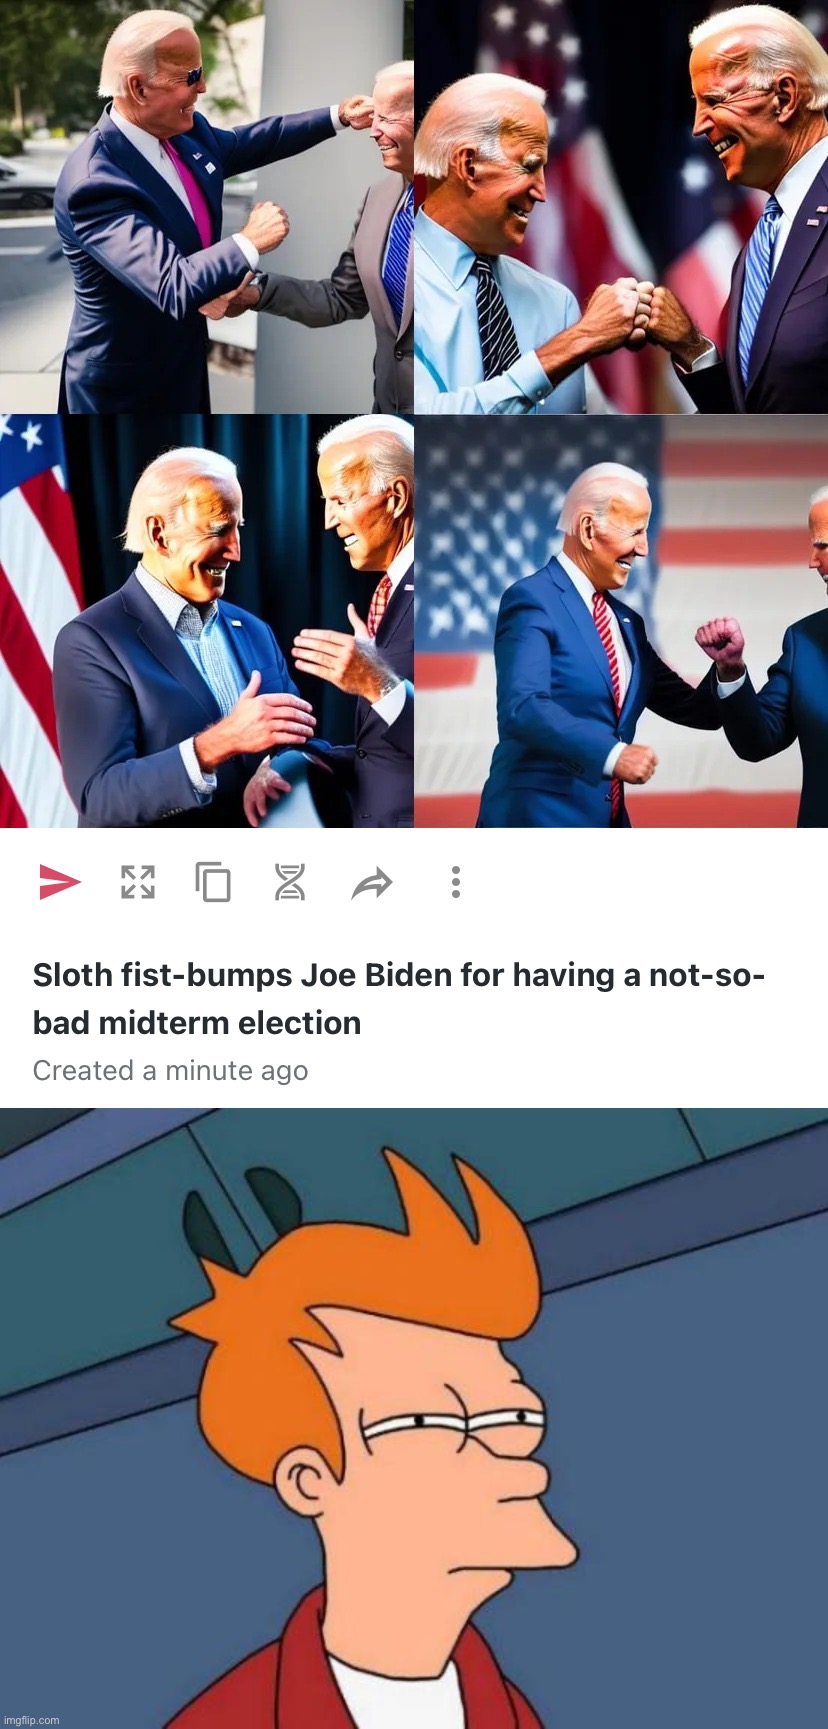 Uncle Joe(s) pushed me out of the frame last second. Rude | image tagged in joe biden fist-bumps himself,sloth fist-bumps joe biden,joe biden fist-bumps sloth,out-of-place futurama fry | made w/ Imgflip meme maker